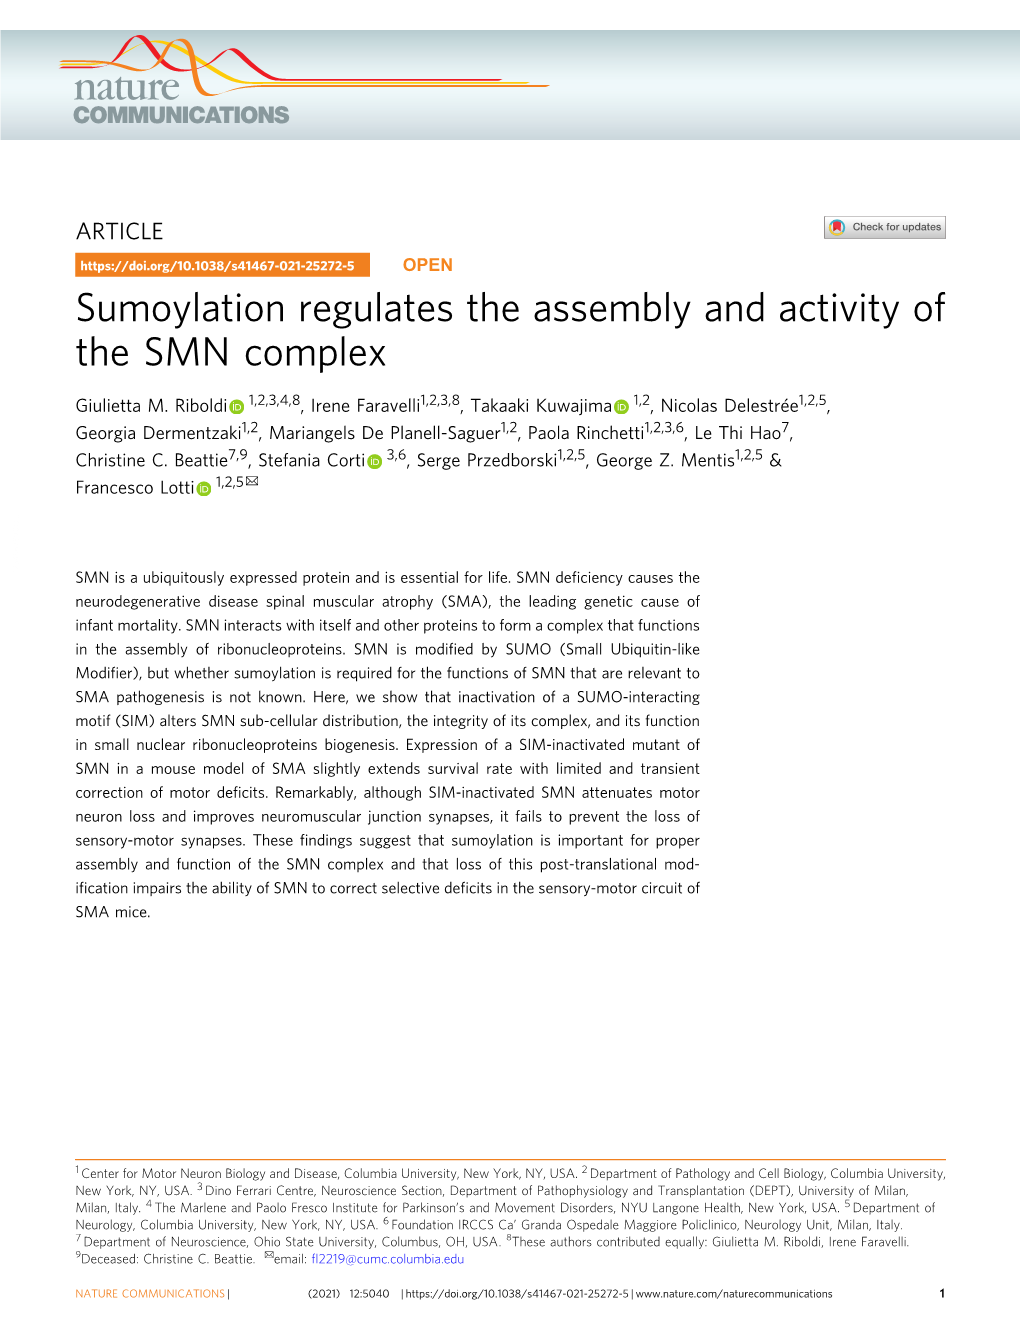 Sumoylation Regulates the Assembly and Activity of the SMN Complex